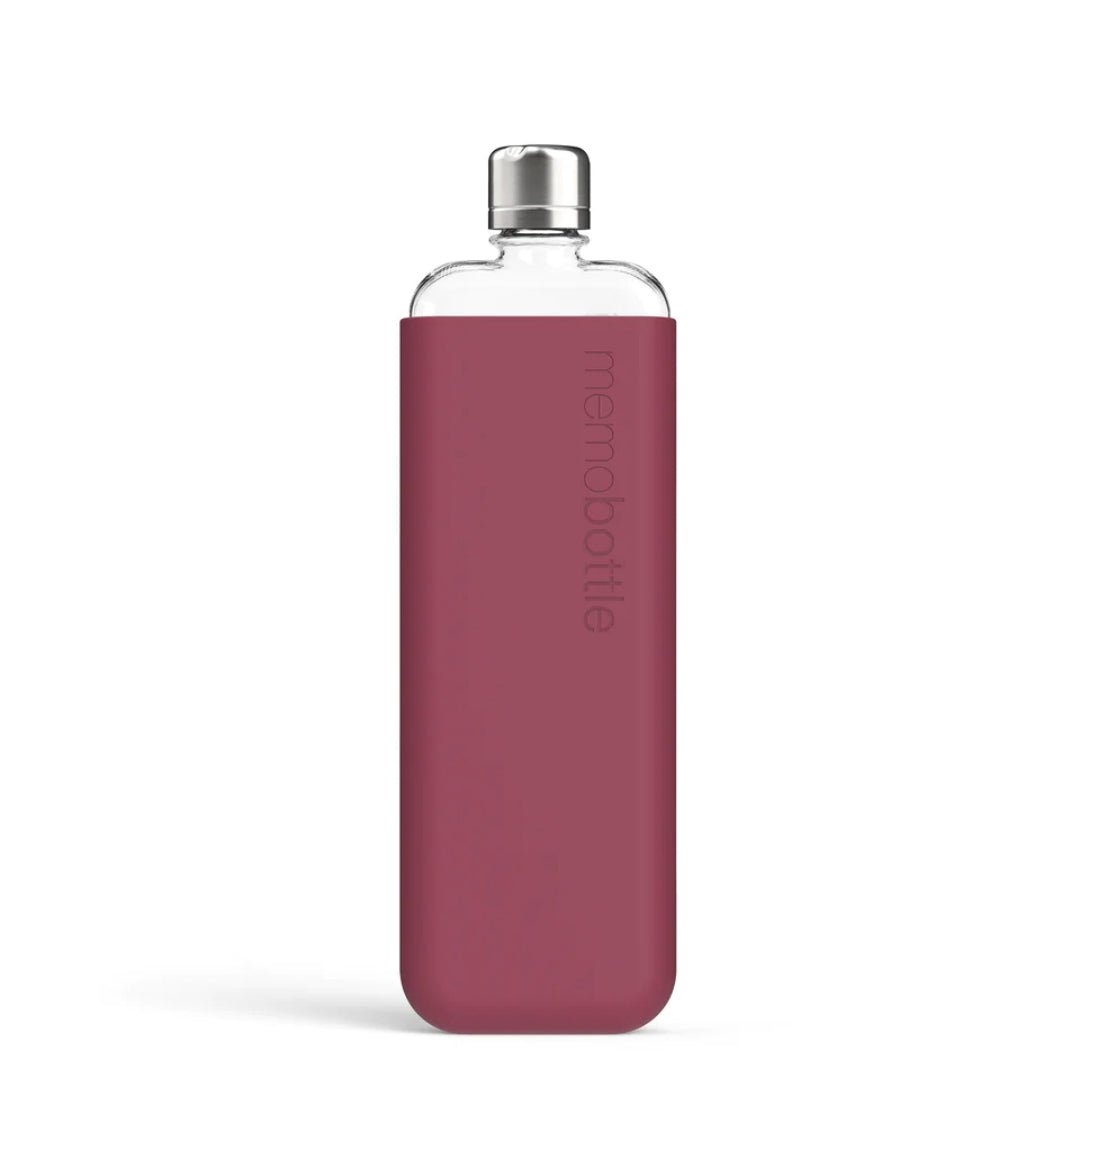 Slim memobottle silicone sleeve - The Flower Crate